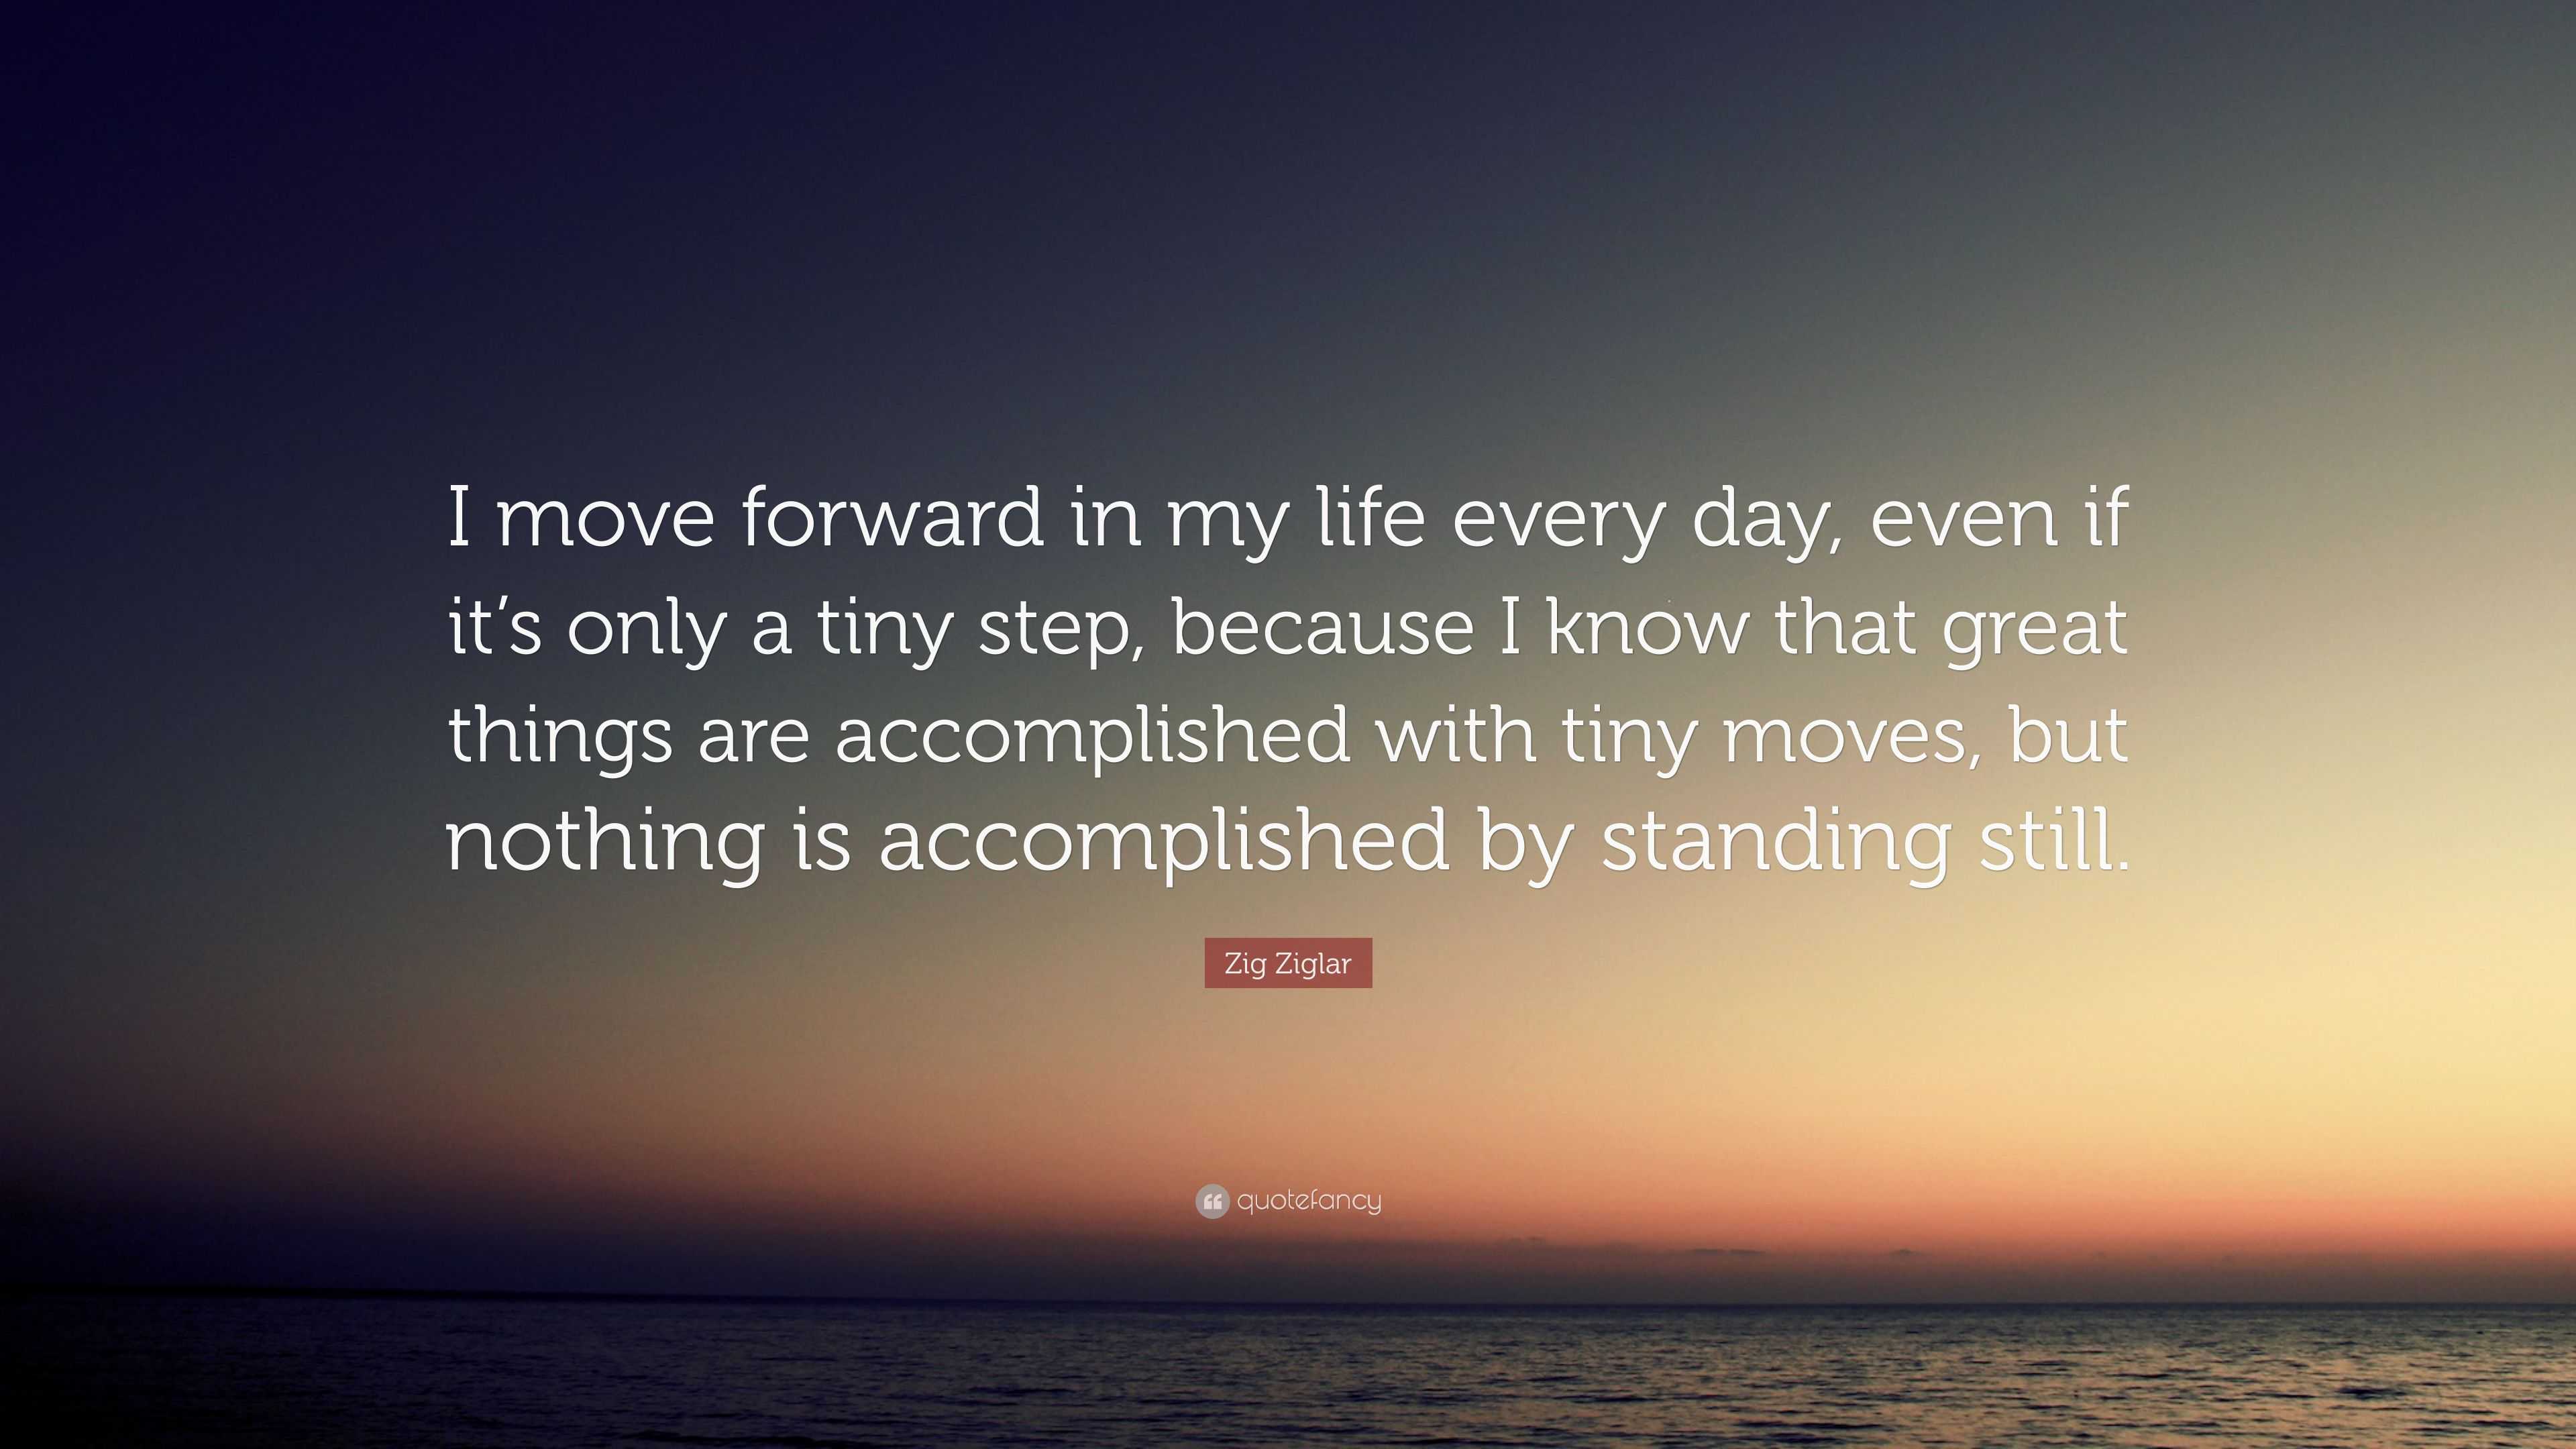 Zig Ziglar Quote: “I move forward in my life every day, even if it’s ...